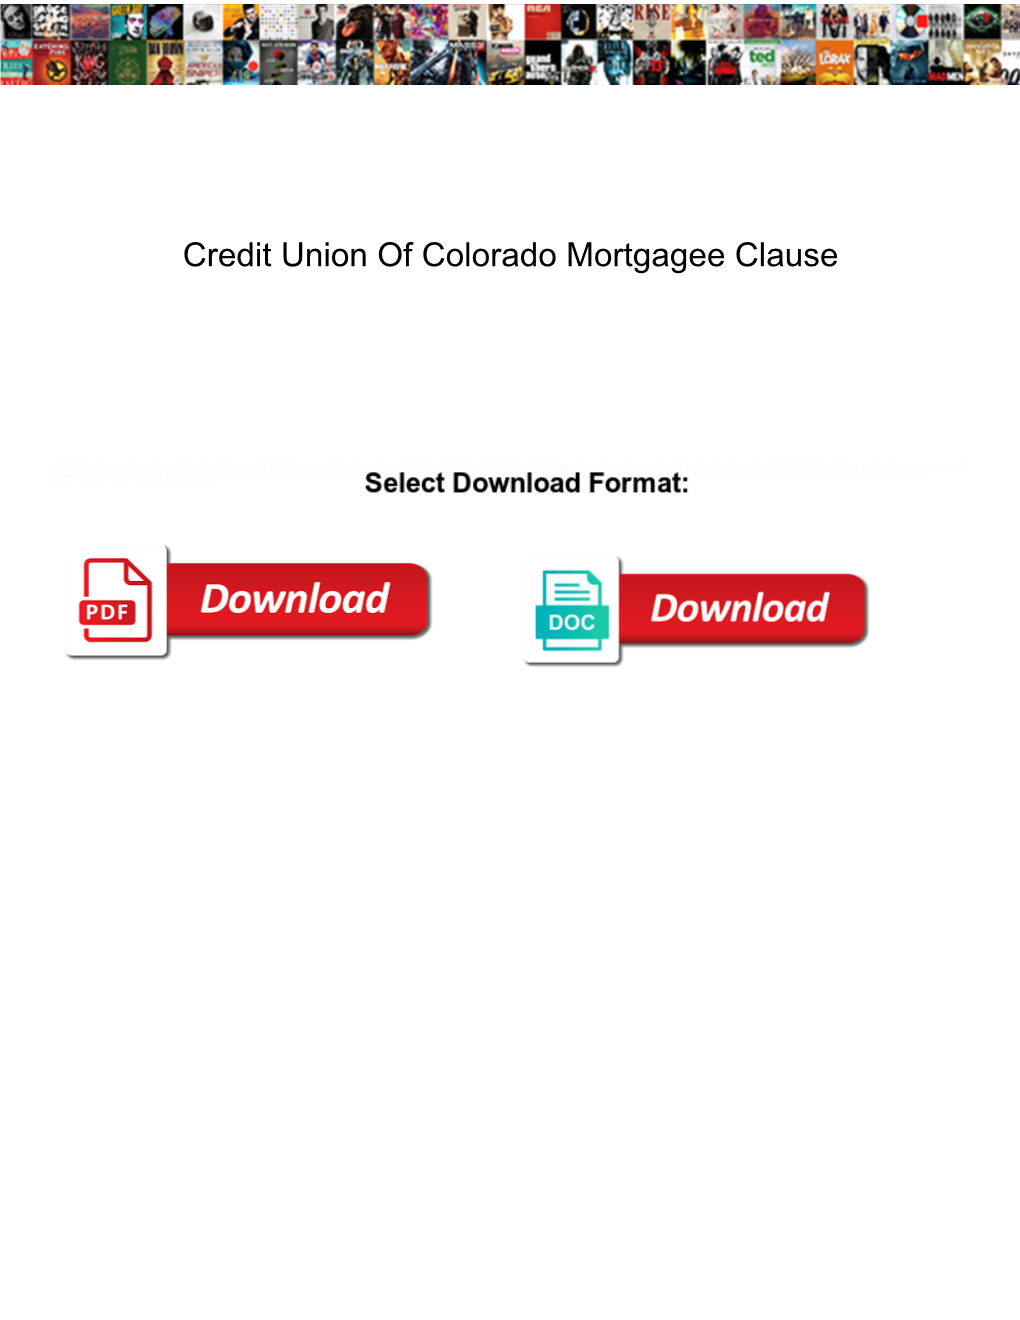 Credit Union of Colorado Mortgagee Clause